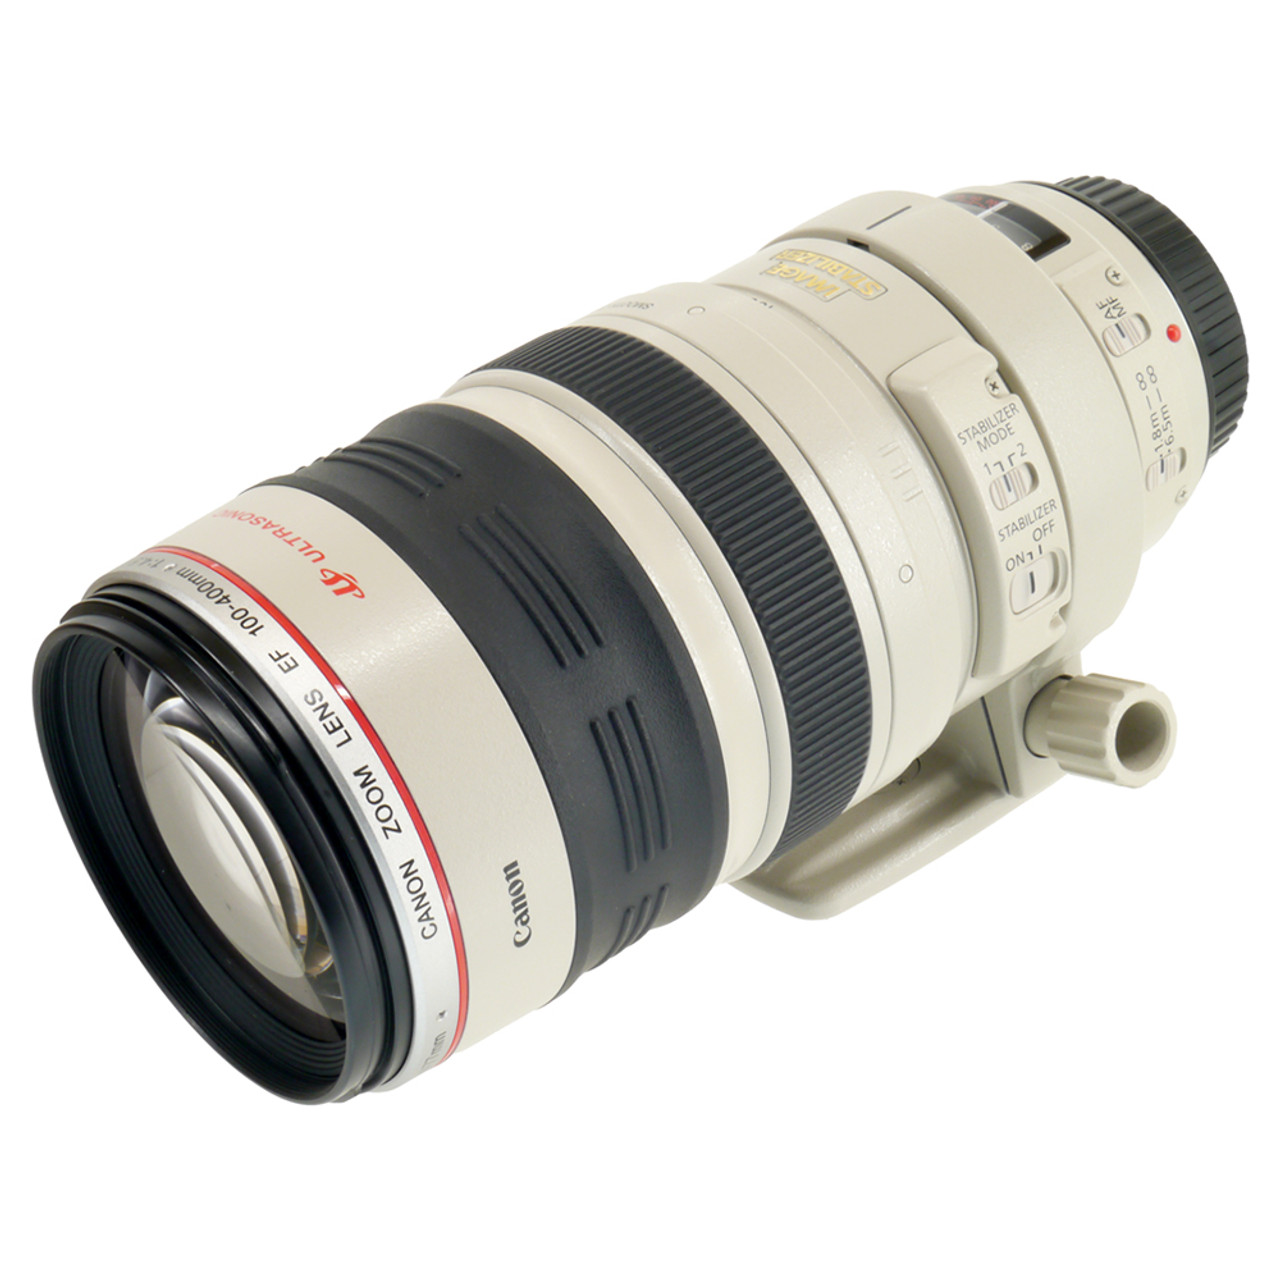 USED CANON EF 100-400MM F4.5-5.6 L IS (763494)